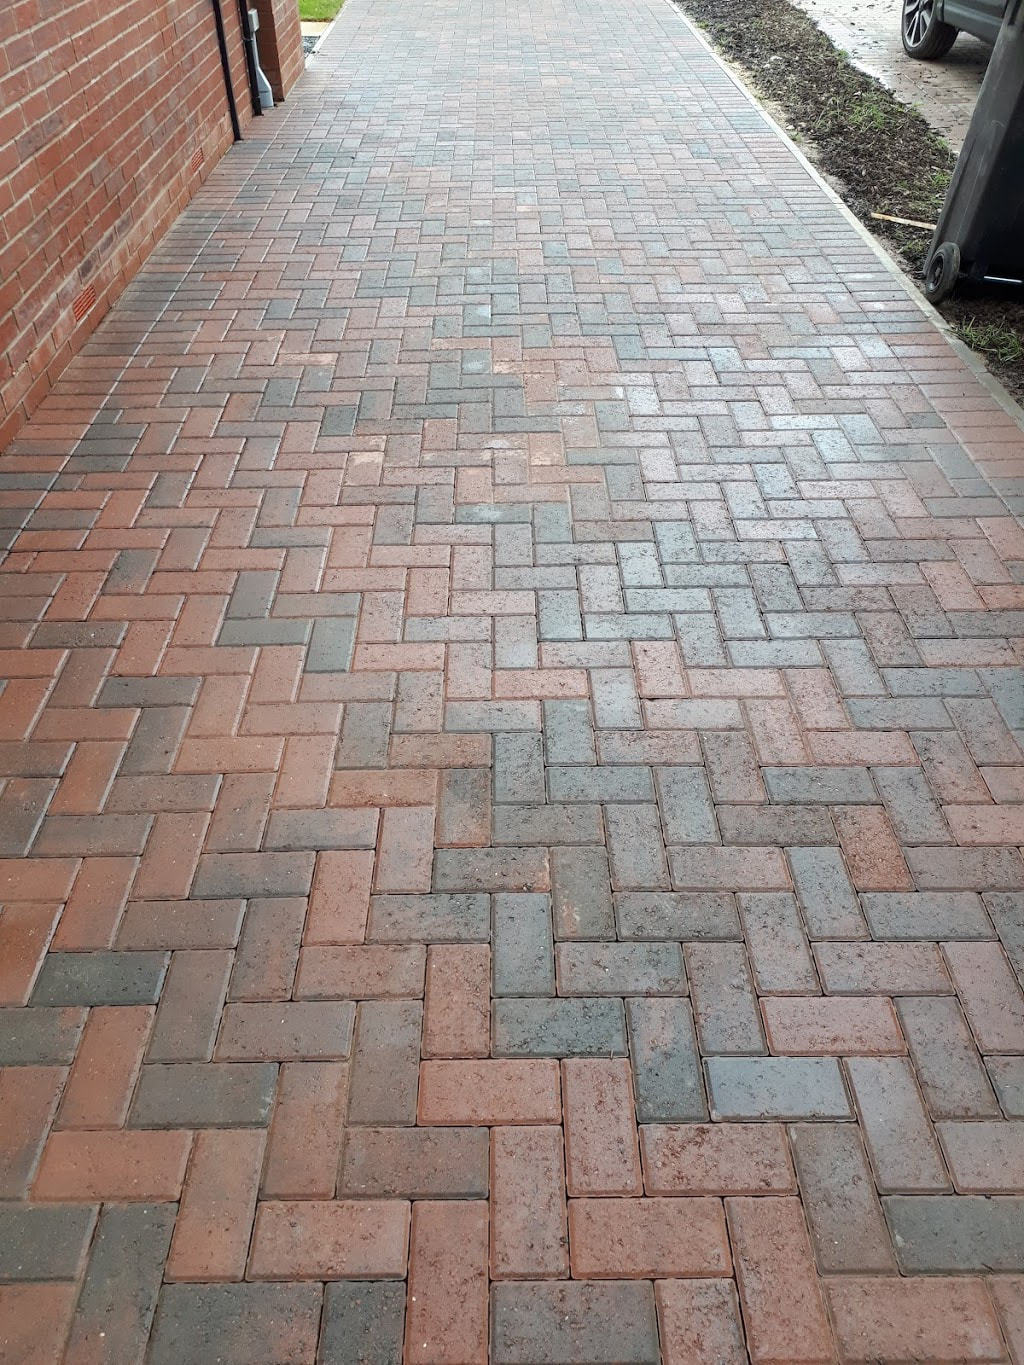 Block paving after being professionally cleaned and sealed